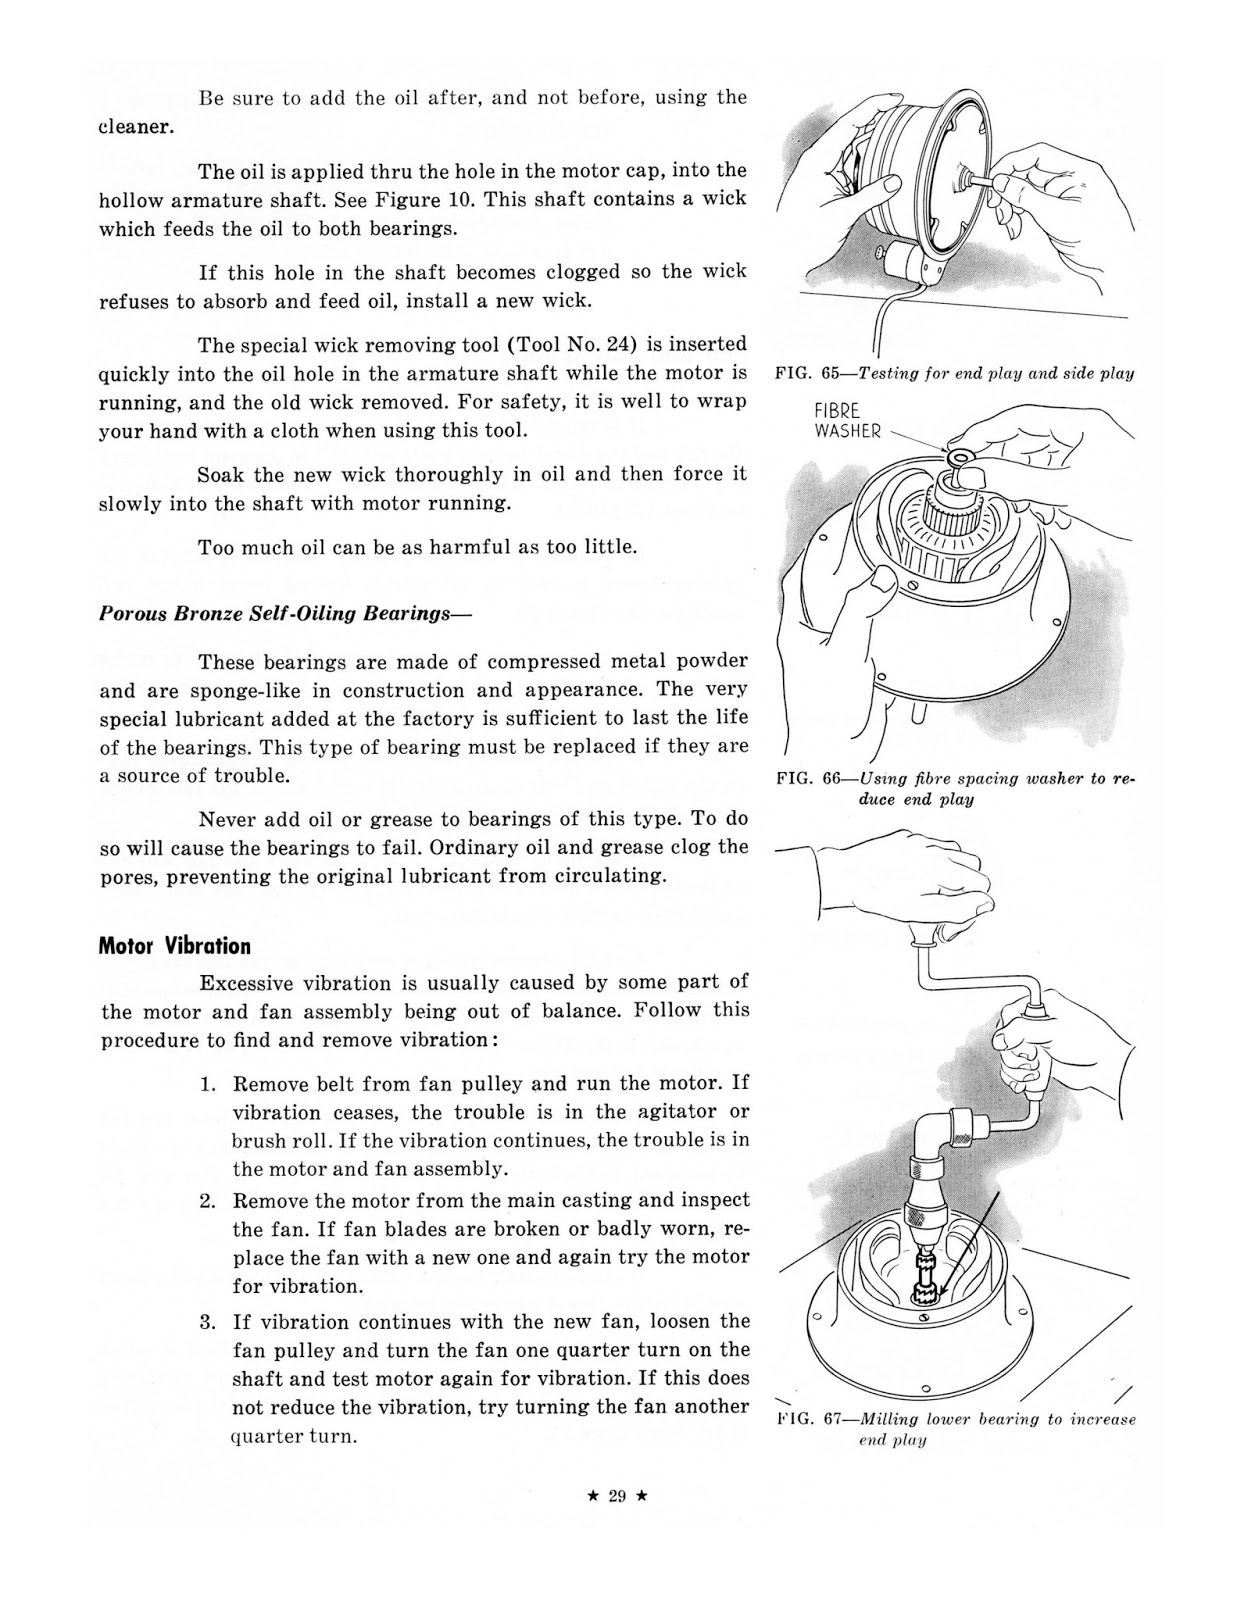 1957 Hoover US Service Manual